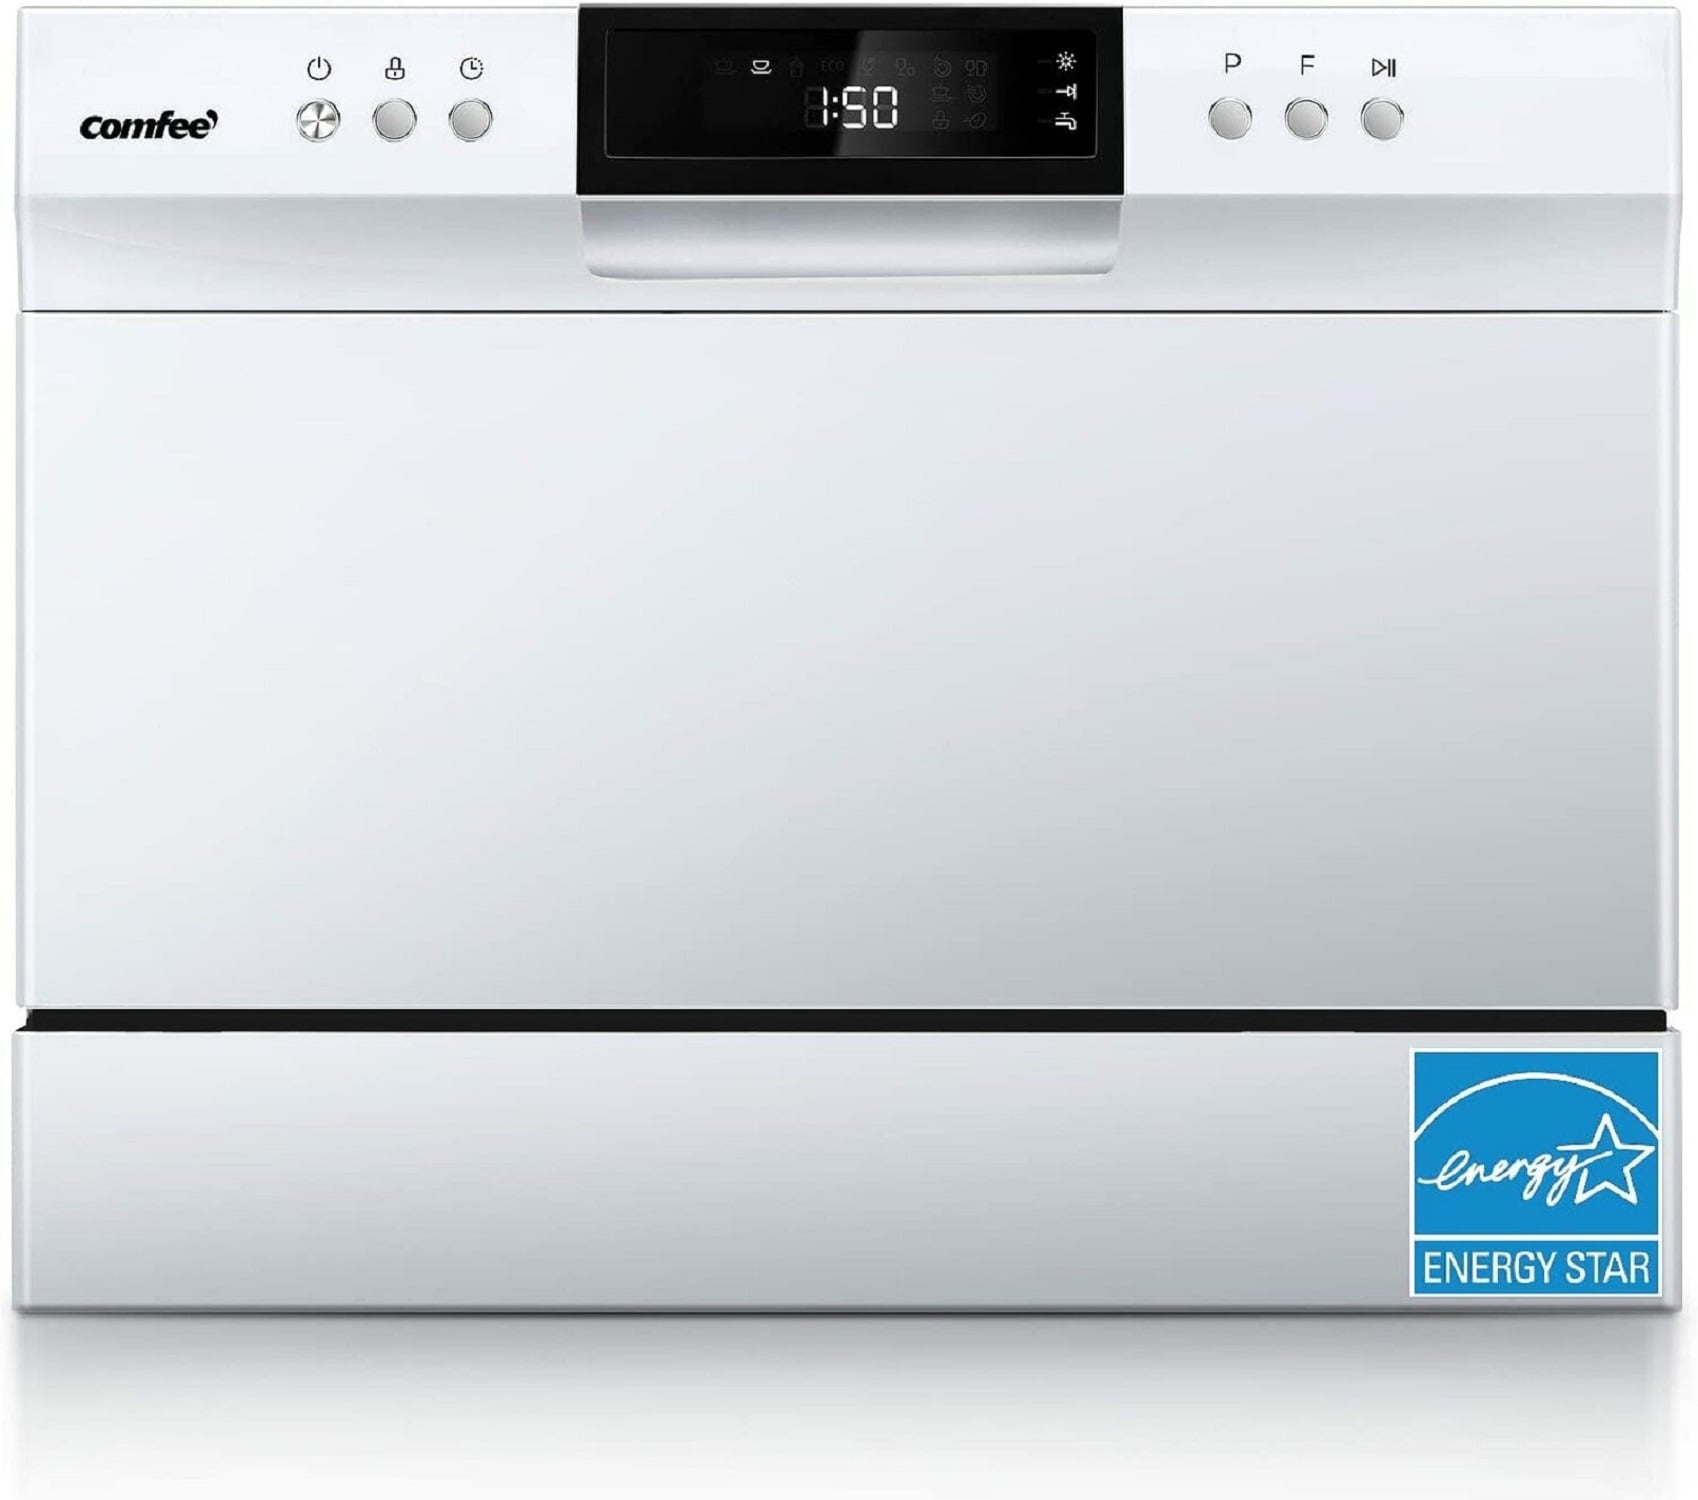 2RR Installs ANOTHER Tiny Dishwasher!! COMFEE 17.24” Countertop Dishwasher  Install & Review! 